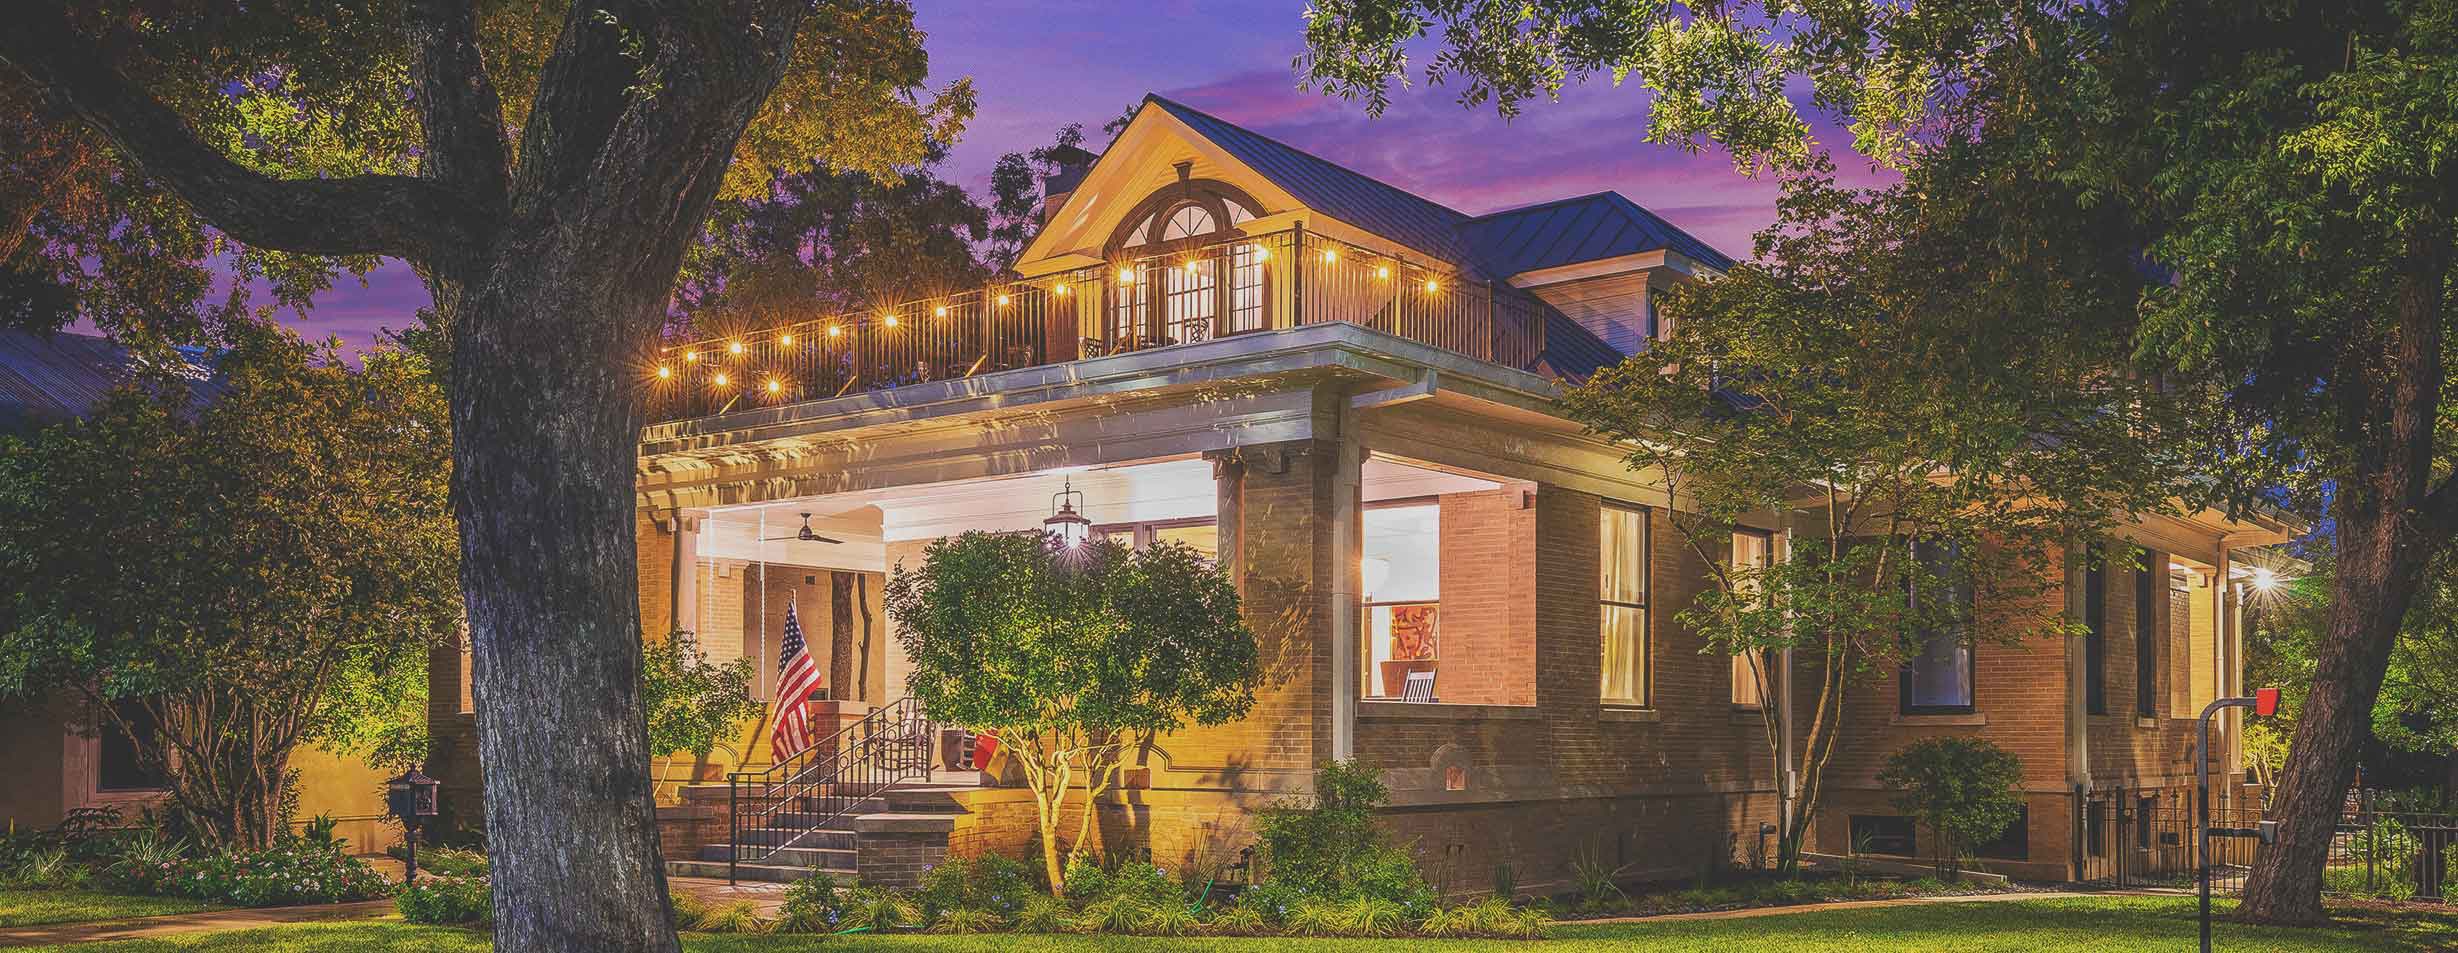 sophies gasthaus boutique hotel in downtown New Braunfels at sunset